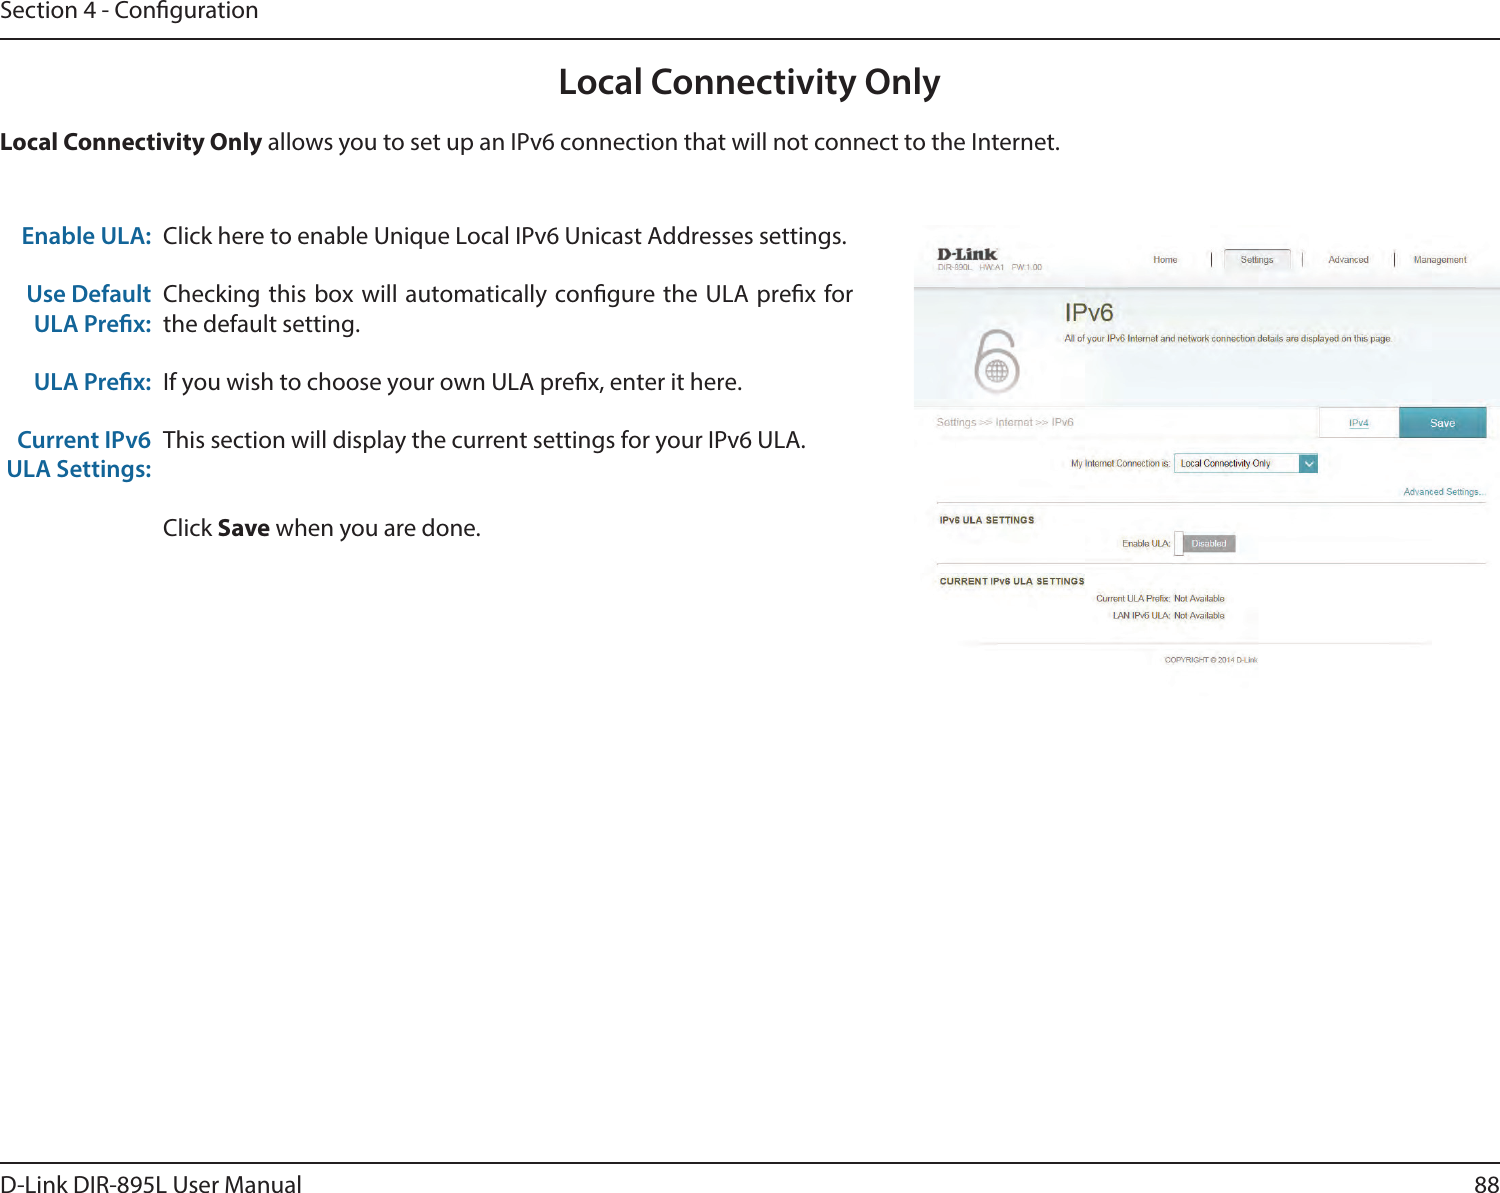 88D-Link DIR-895L User ManualSection 4 - CongurationLocal Connectivity OnlyClick here to enable Unique Local IPv6 Unicast Addresses settings.Checking this box will automatically congure the ULA prex for the default setting.If you wish to choose your own ULA prex, enter it here.This section will display the current settings for your IPv6 ULA.Click Save when you are done.Enable ULA:Use Default ULA Prex:ULA Prex:Current IPv6 ULA Settings:Local Connectivity Only allows you to set up an IPv6 connection that will not connect to the Internet.